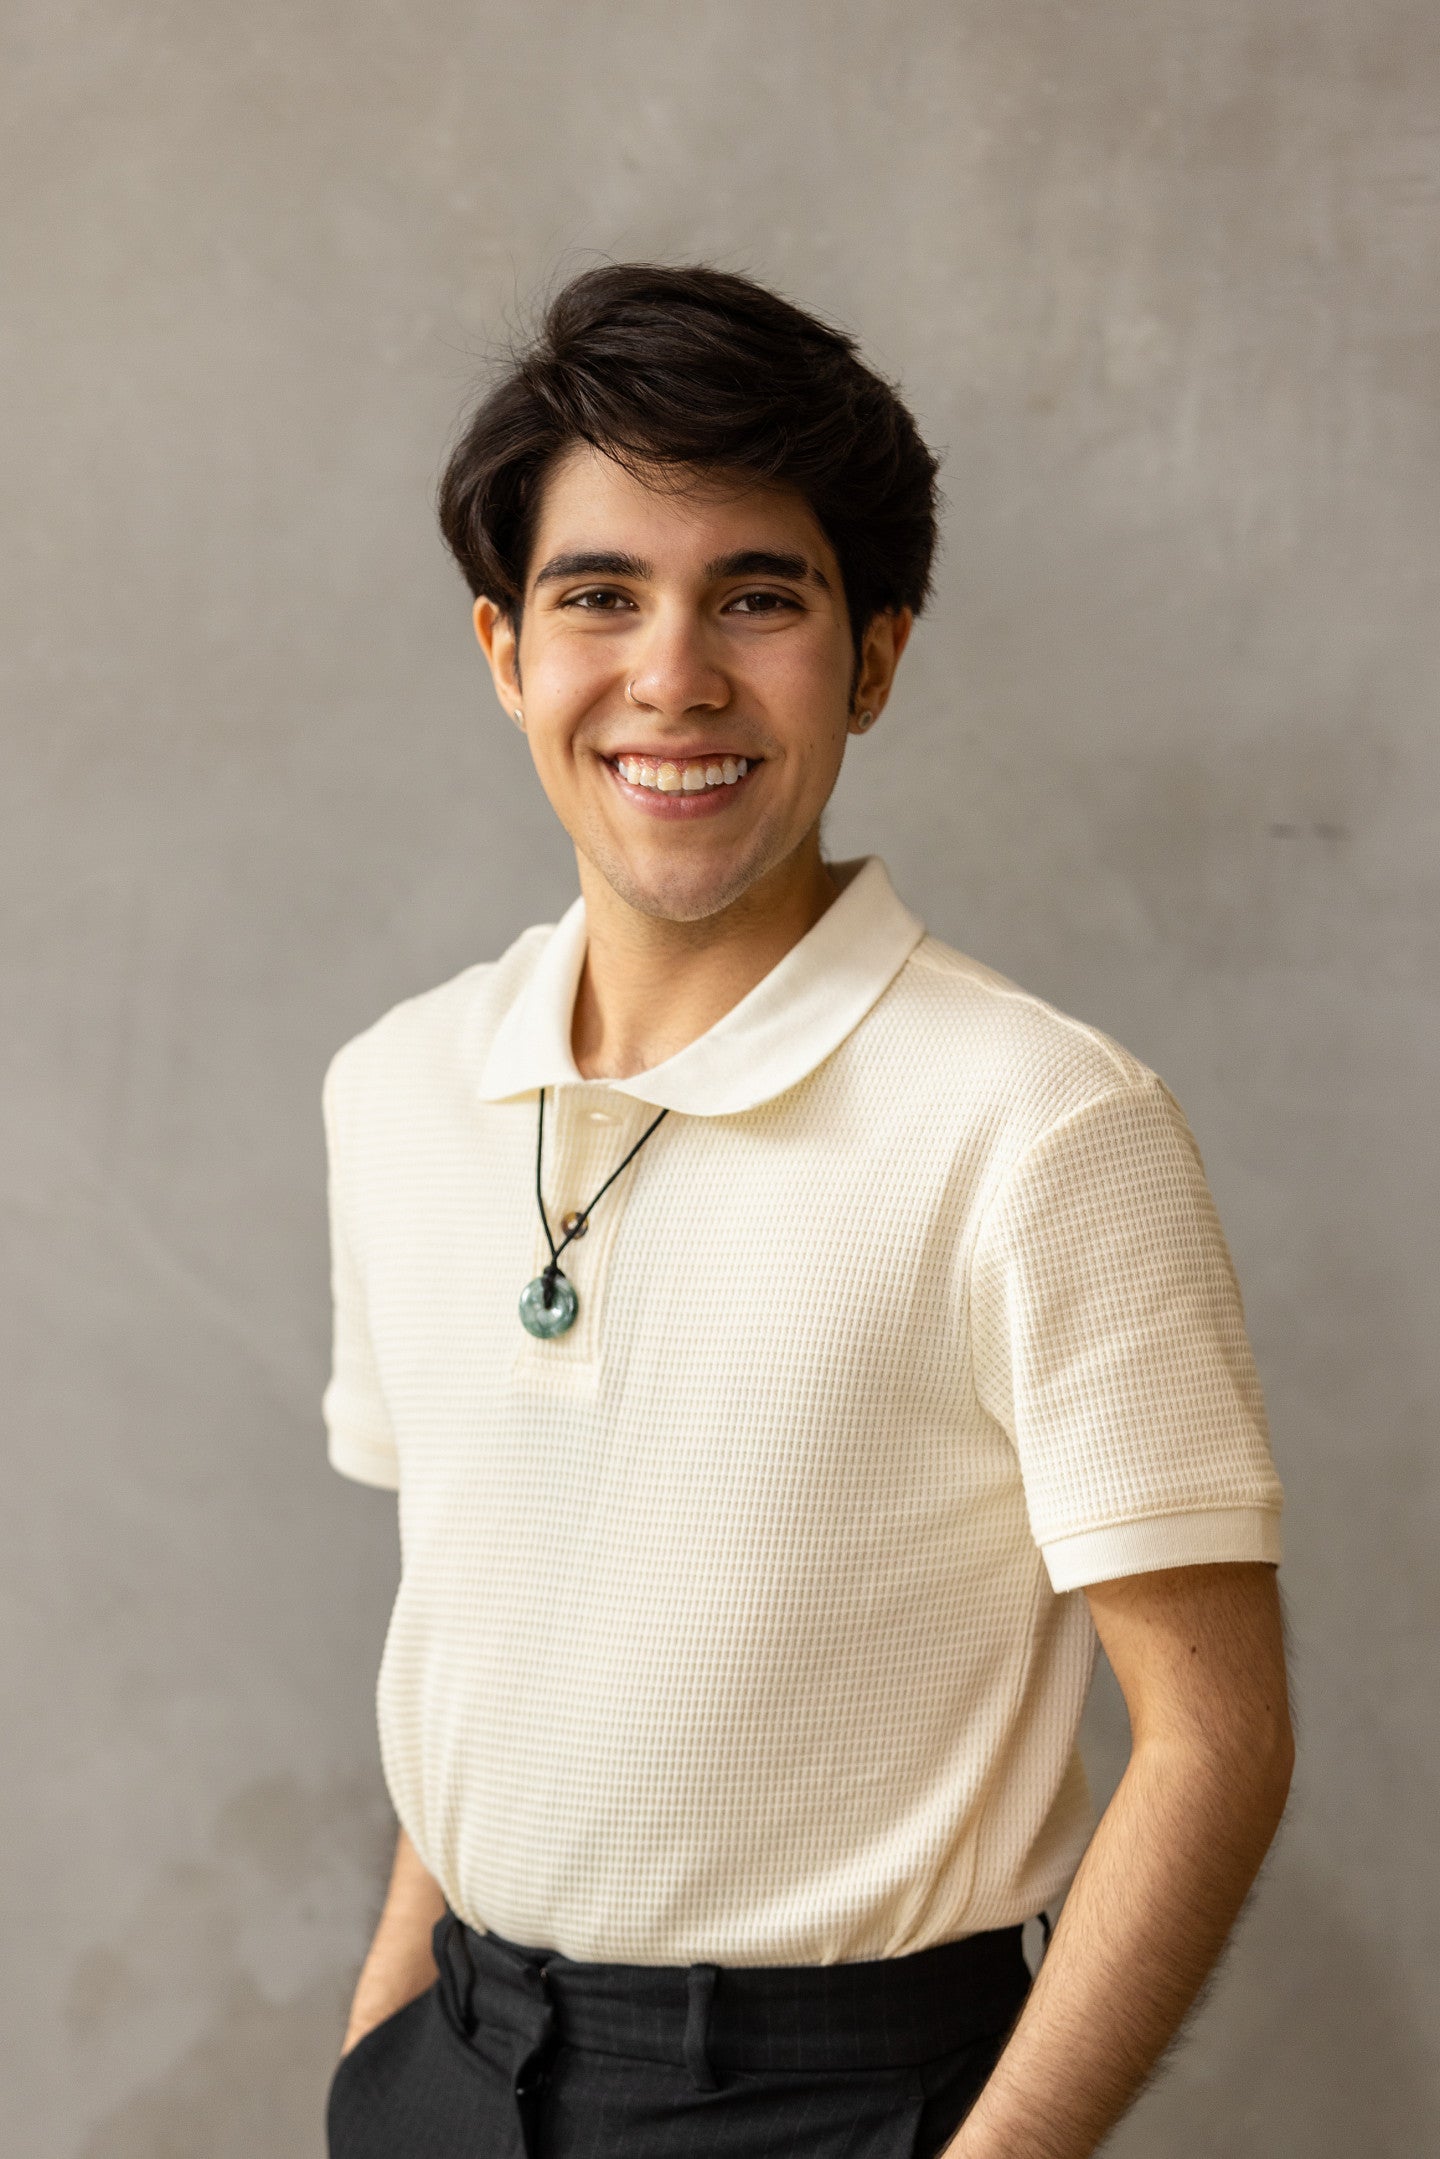 Photograph of Jonah Gomez Cabrera. Shows a smiling individual in a white shirt and short hair. 